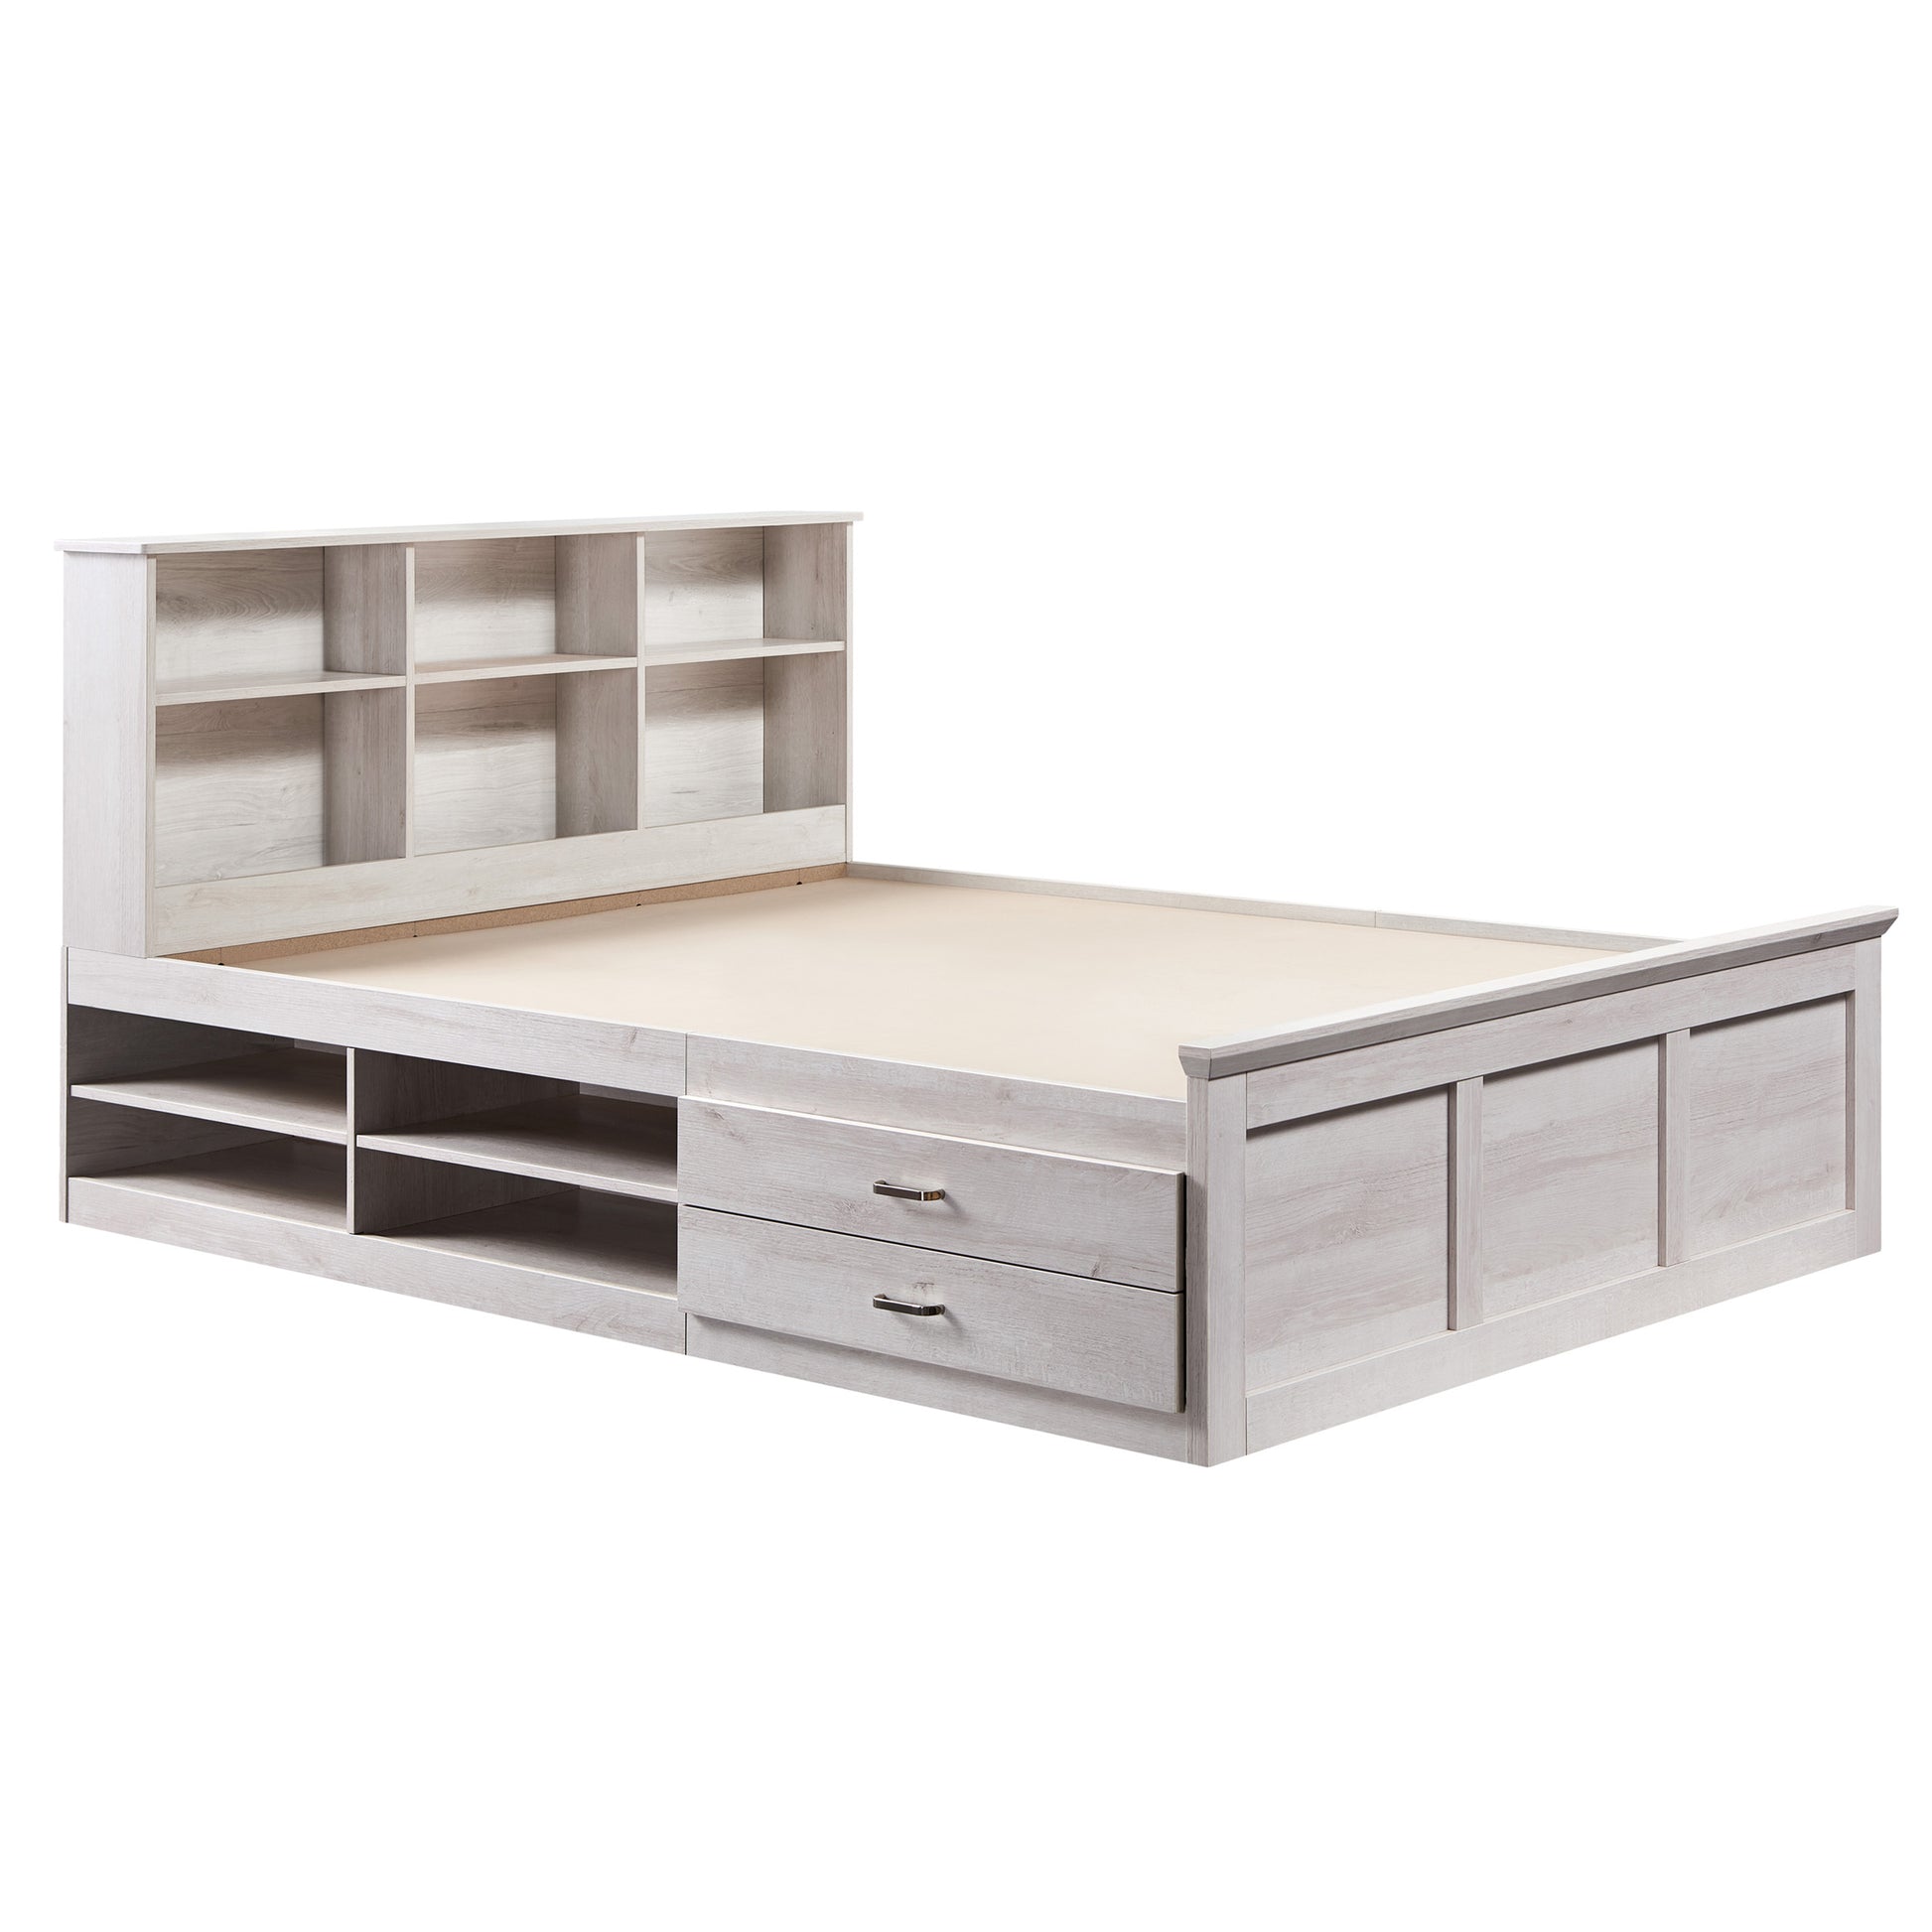 Right angled transitional two-drawer four-shelf platform storage bed shown with optional headboard on a white background